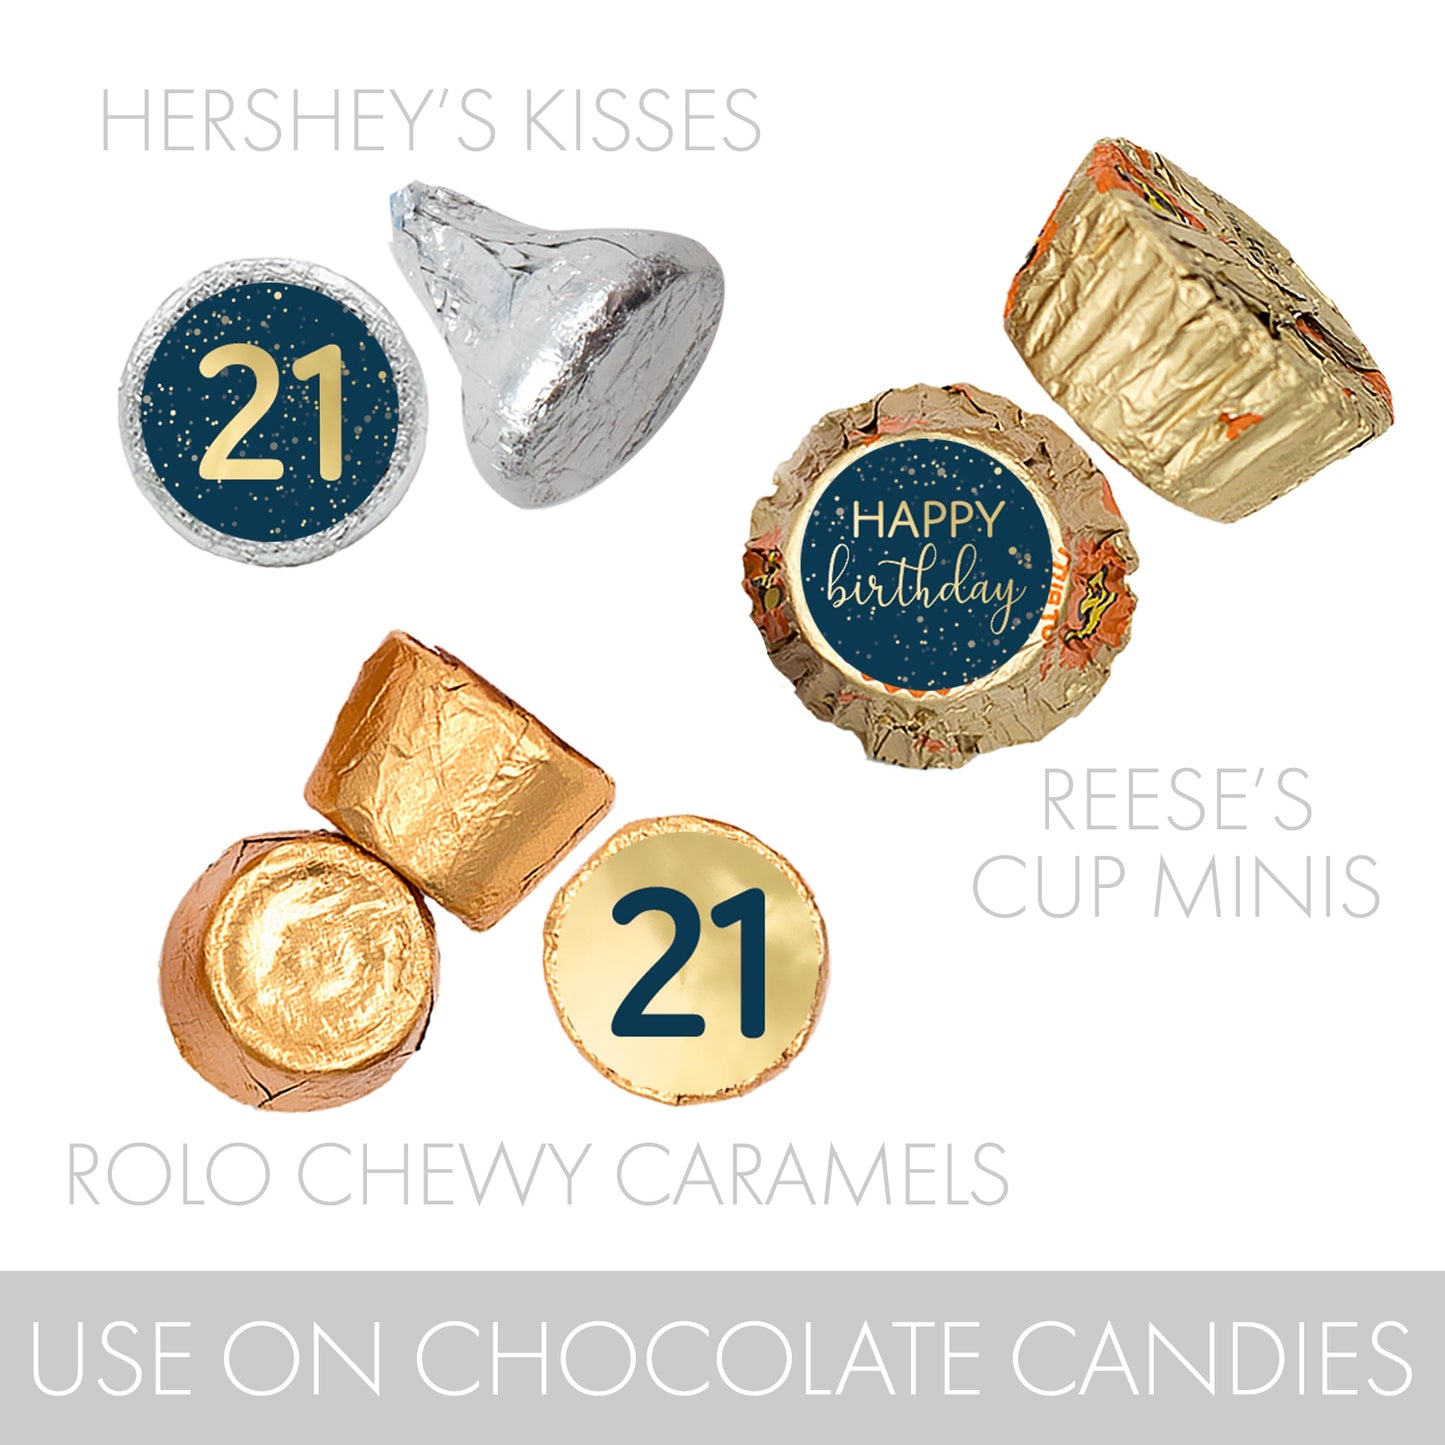 Celebrate your 21st birthday in style with these matching Hersheys Kisses stickers